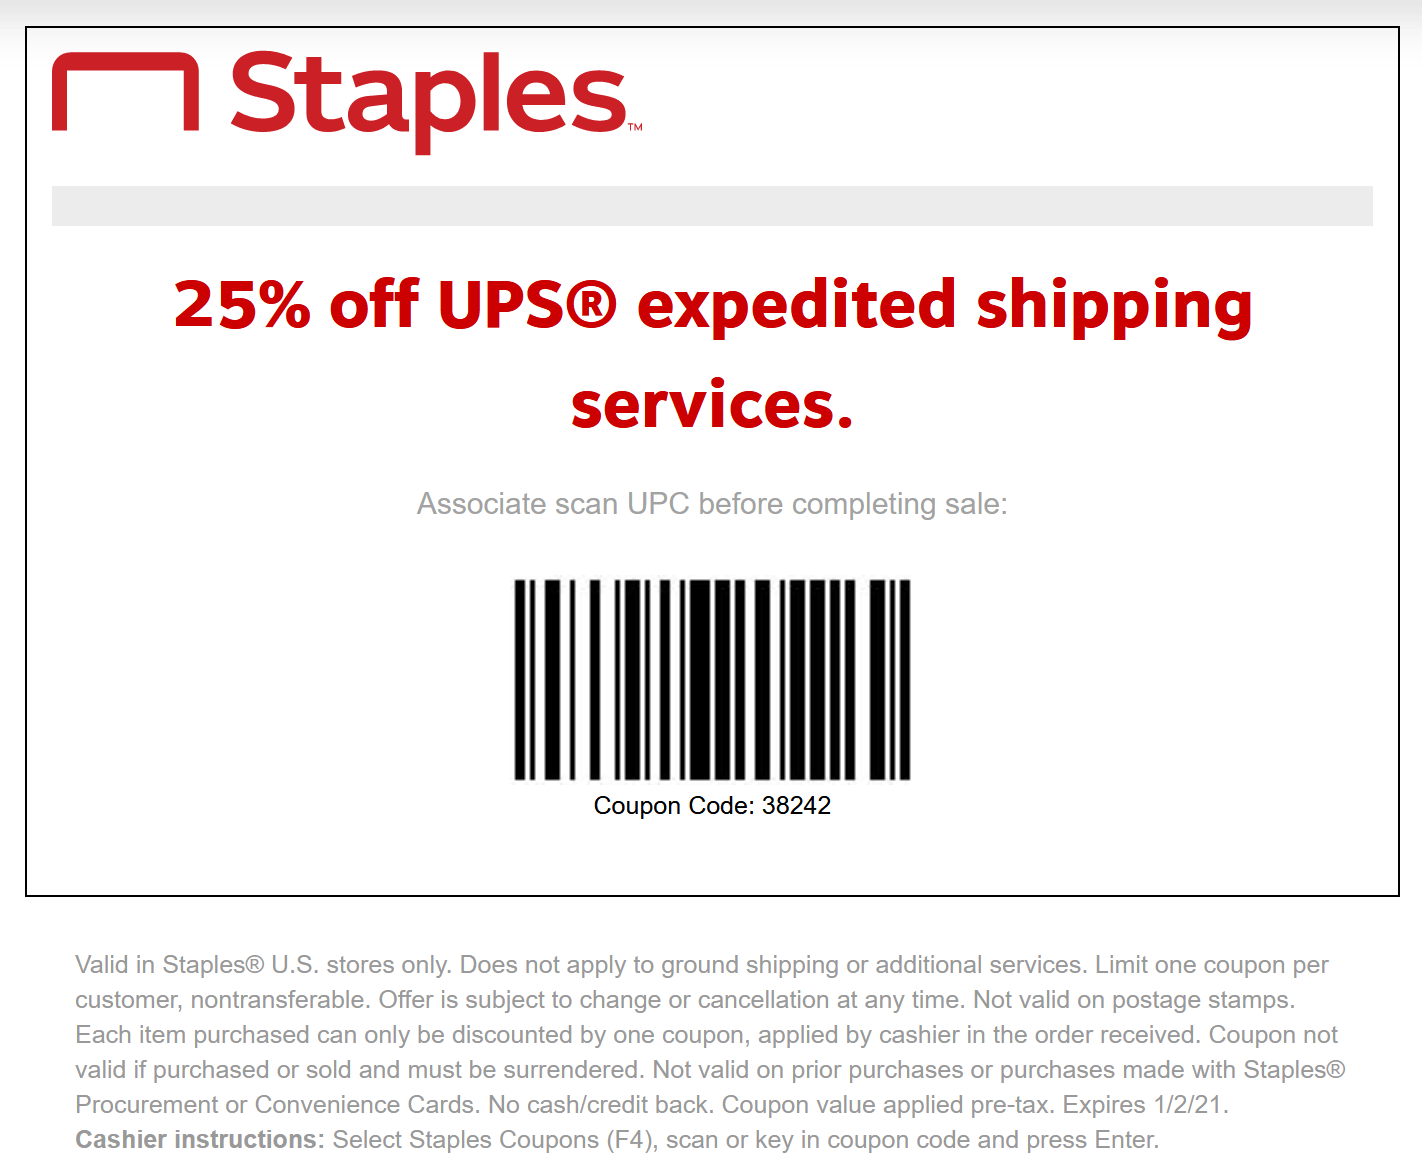 25 off UPS expedited shipping services at Staples staples The Coupons App®